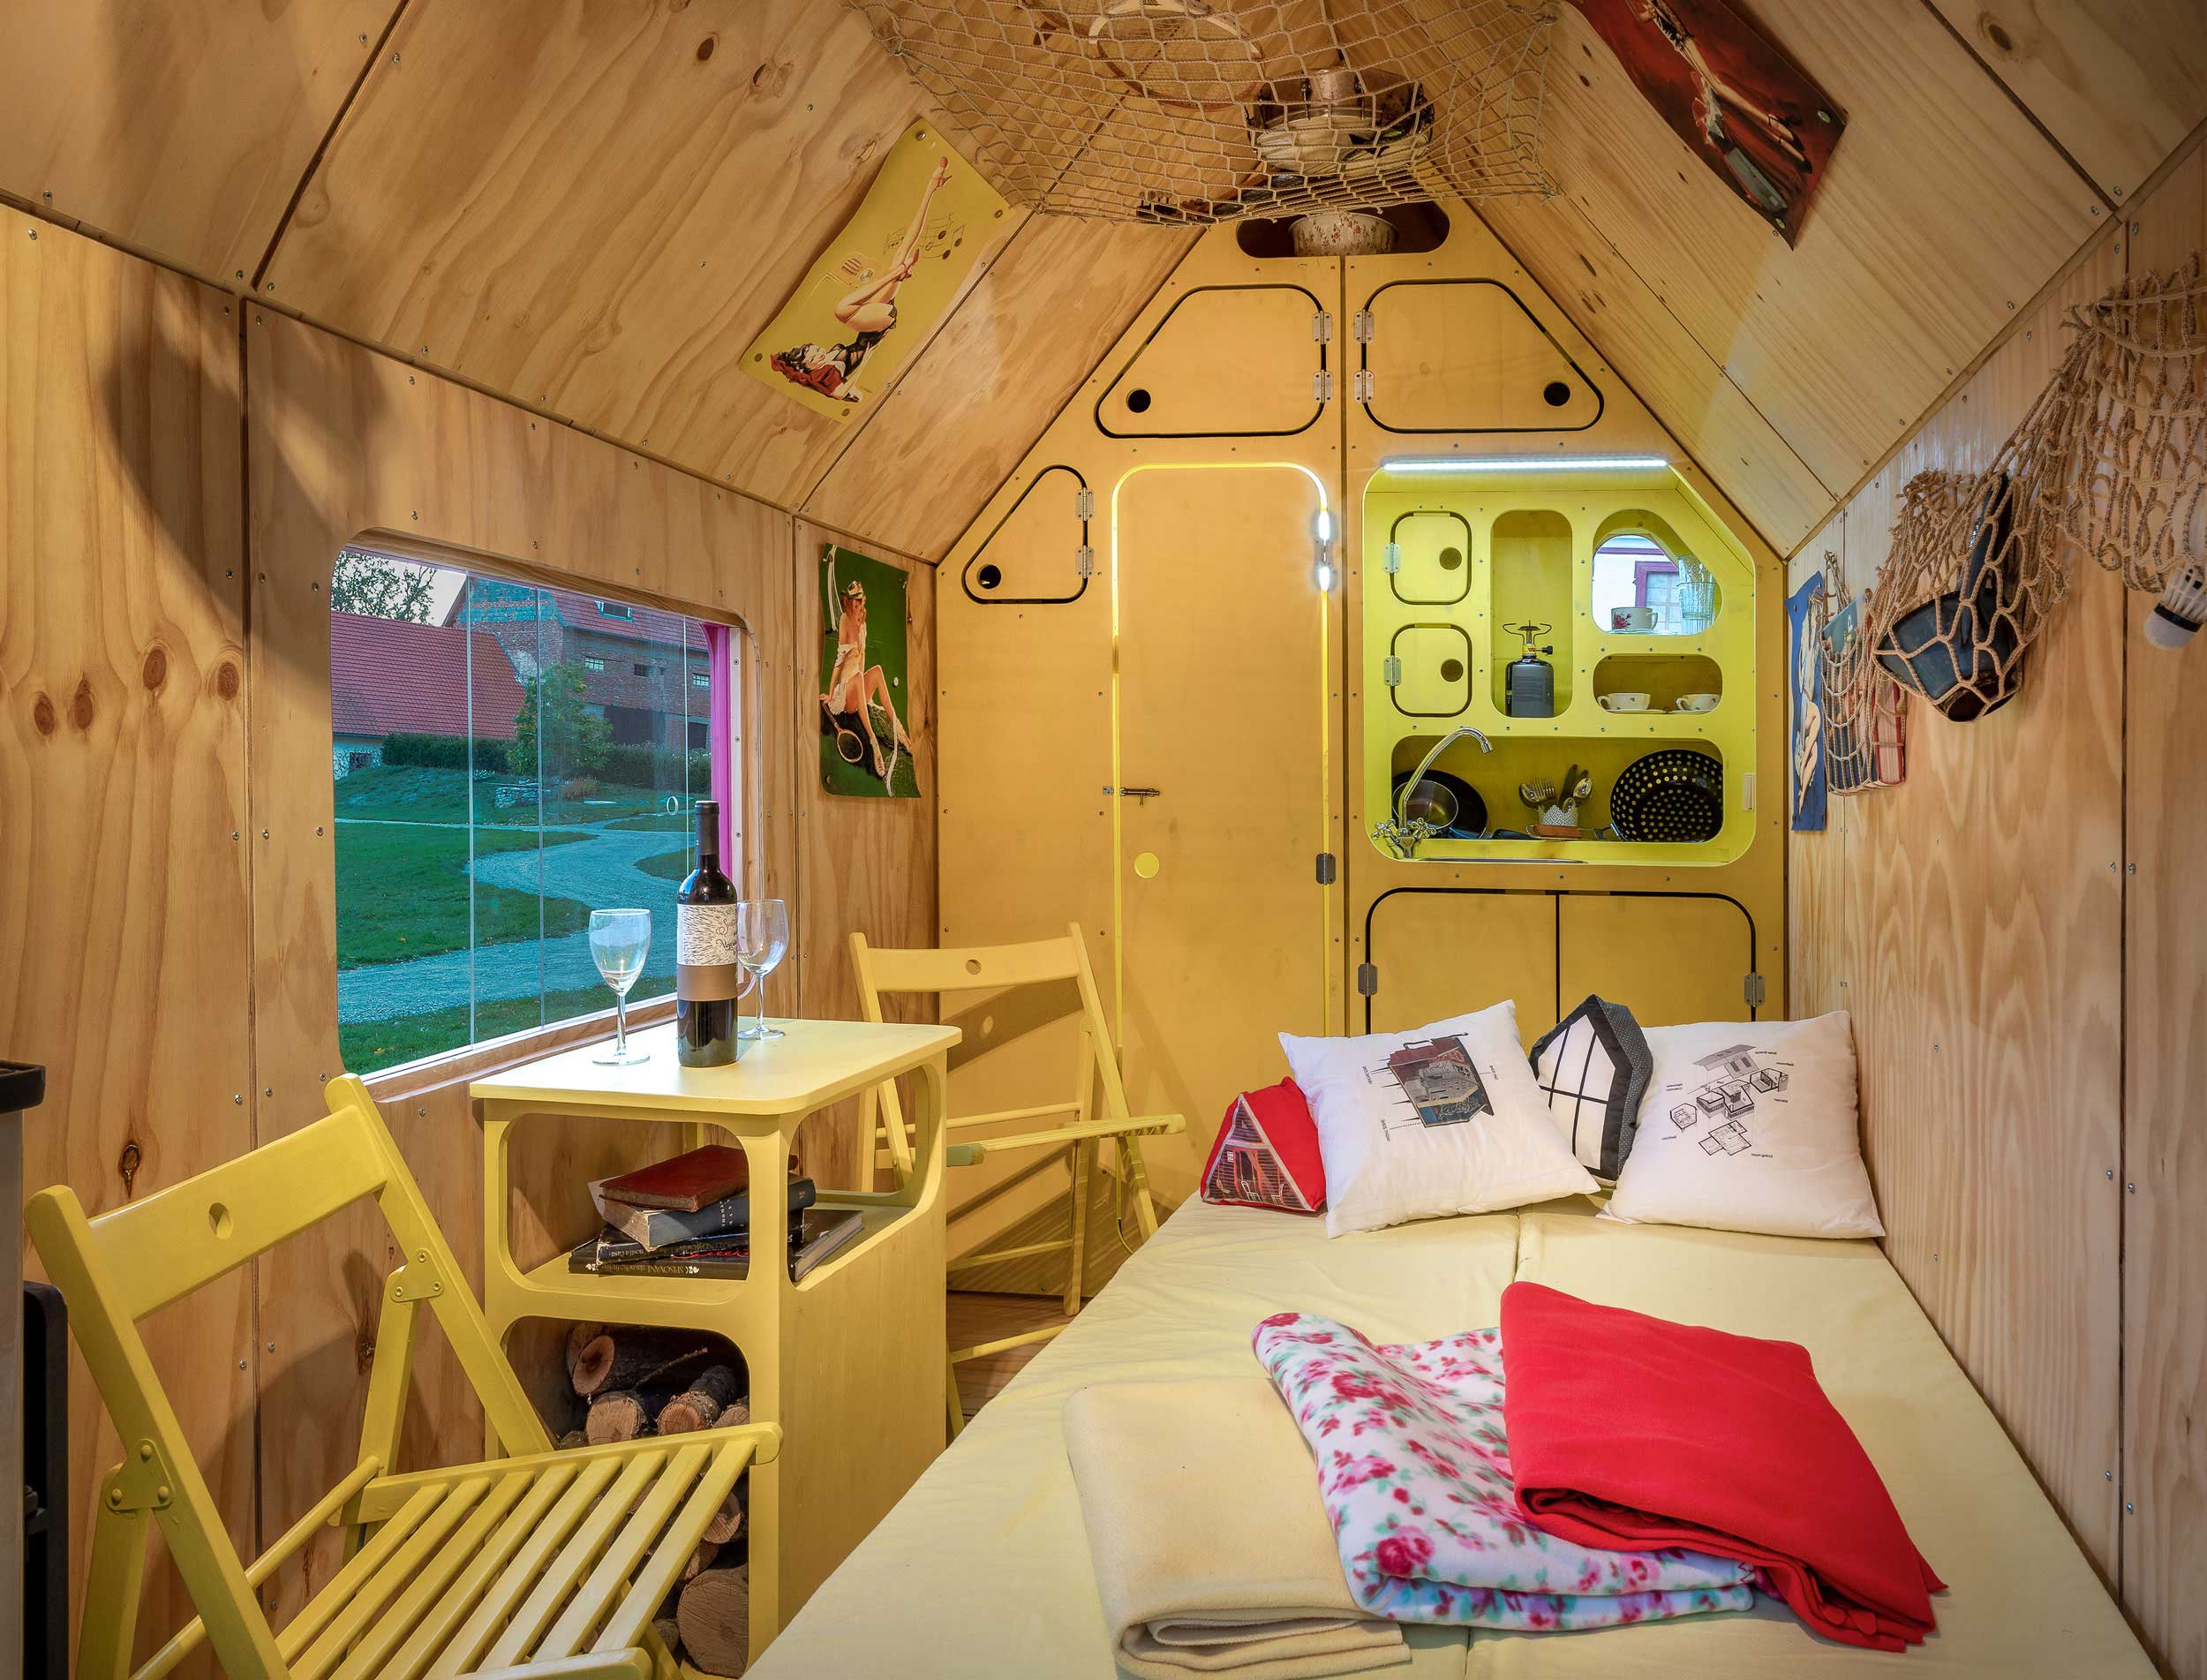 https://www.pinuphouses.com/wp-content/uploads/Pin-Up-Houses-small-mobile-home-interior.jpg